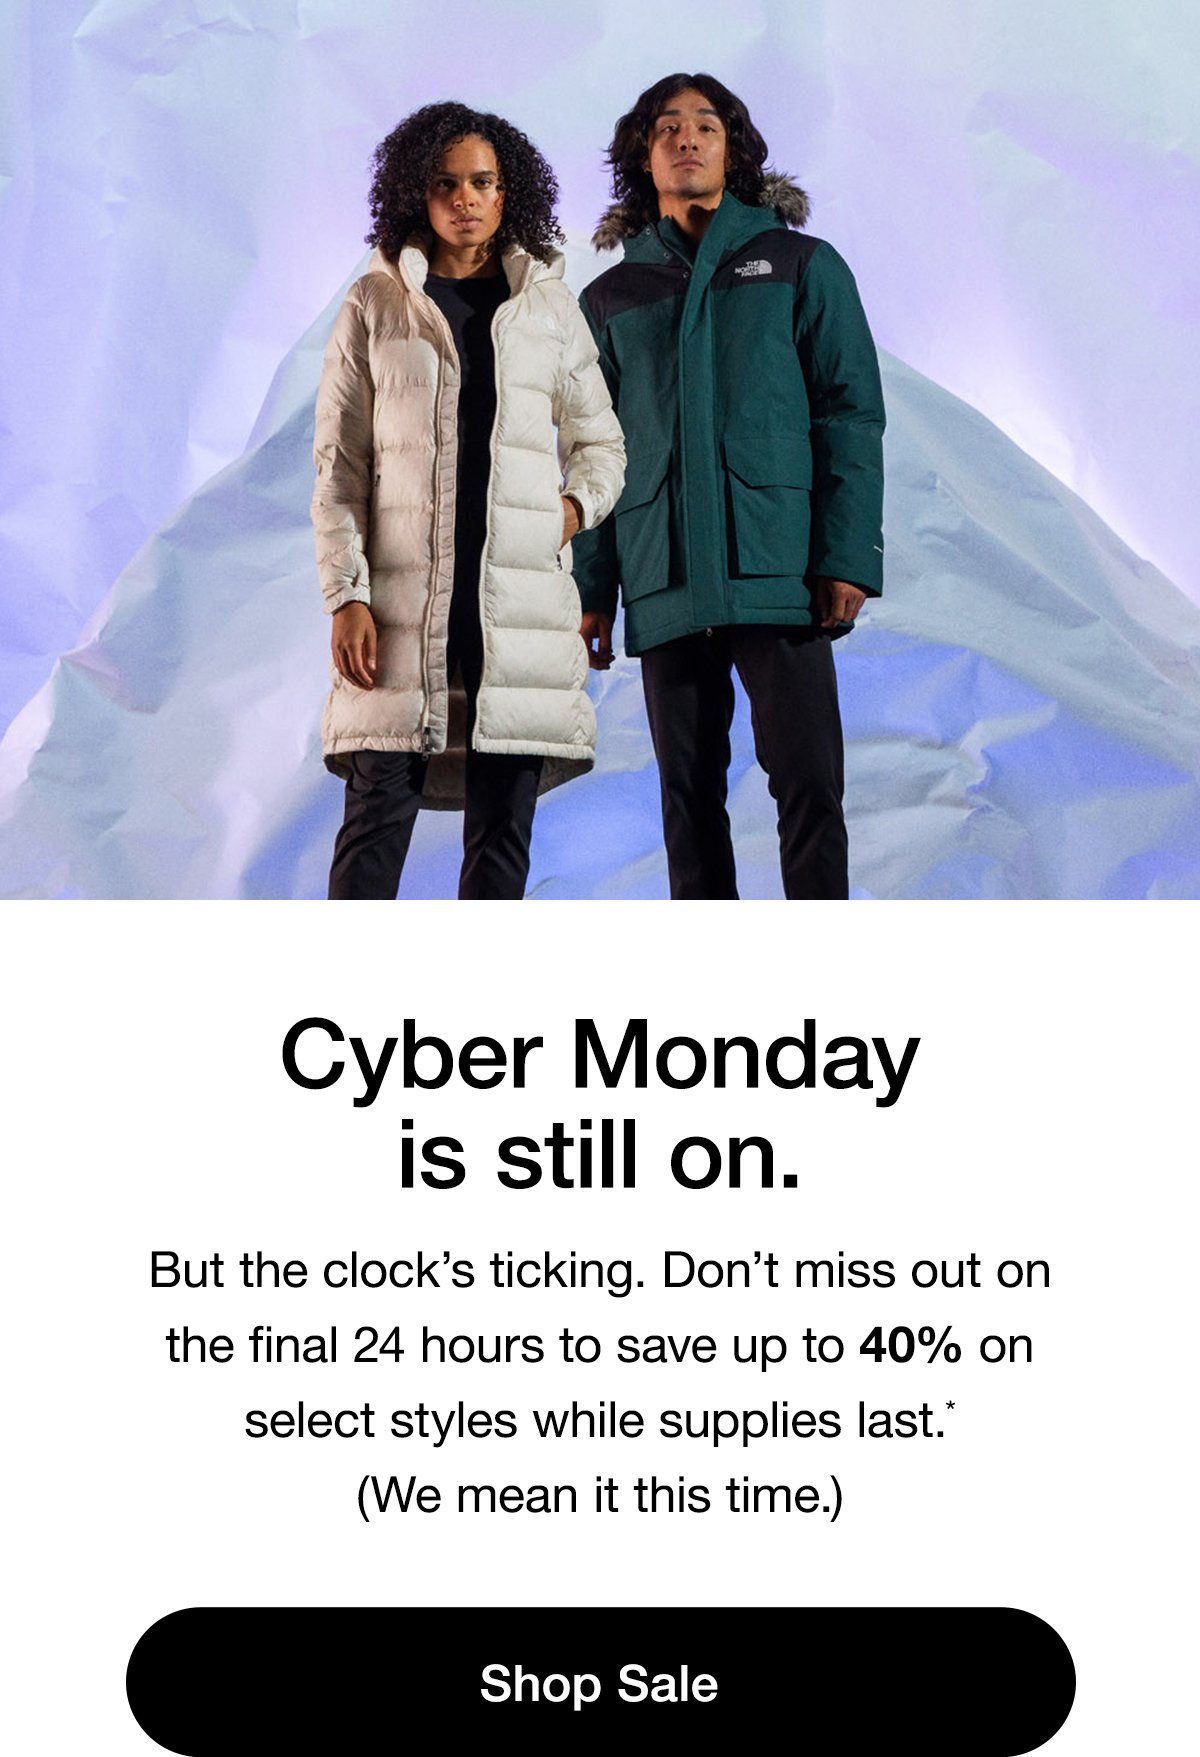 Cyber Monday is still on. But the clock’s ticking. Don’t miss out on the final 24 hours to save up to 40% on select styles while supplies last.* We mean it this time. Shop Sale